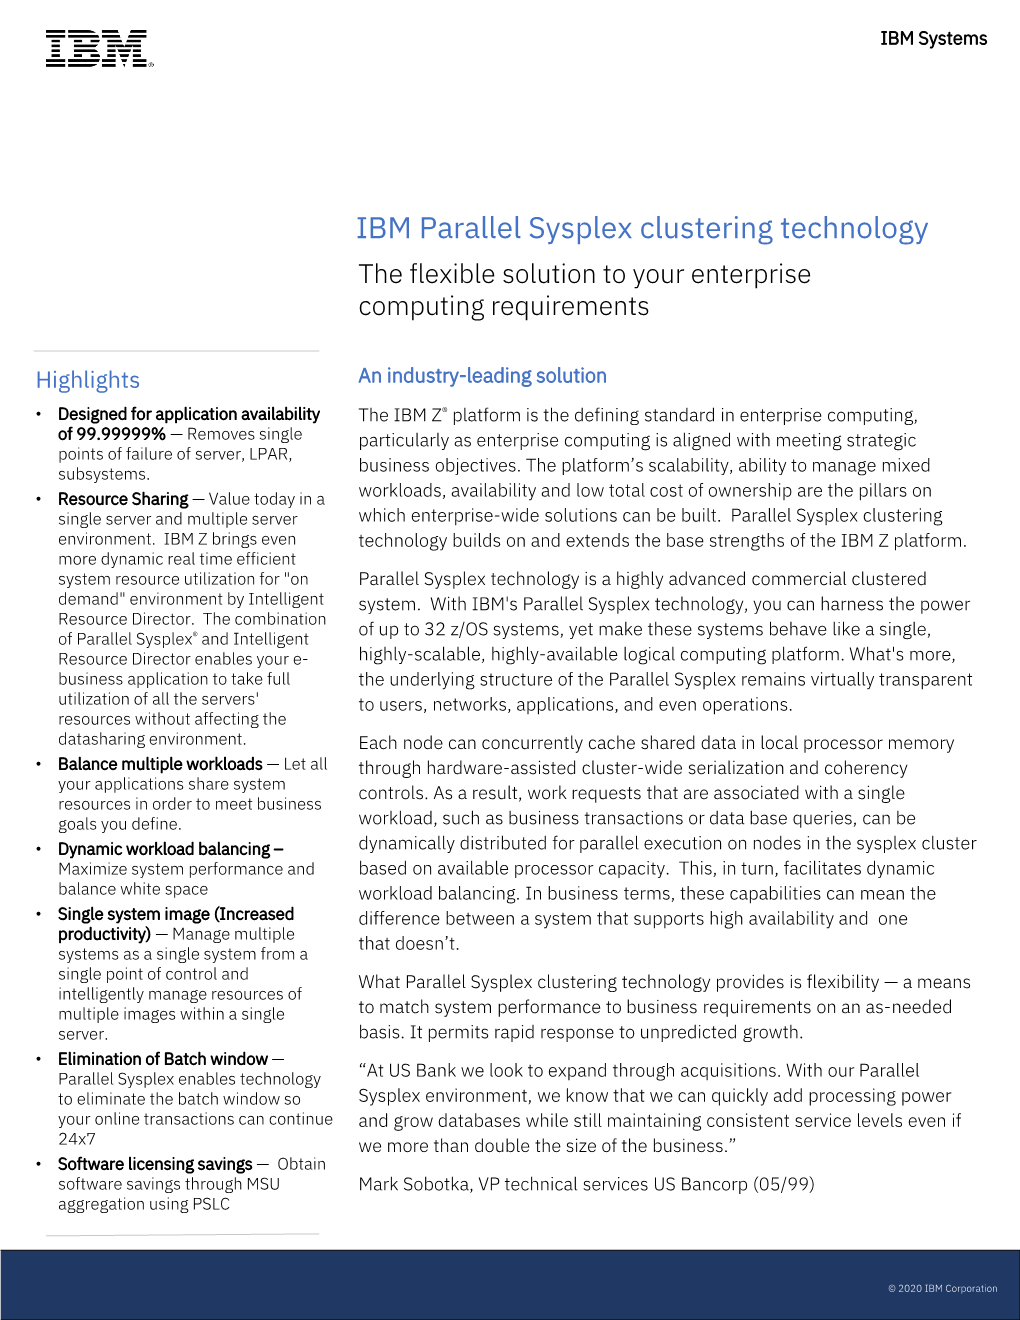 IBM Parallel Sysplex Clustering Technology the Flexible Solution to Your Enterprise Computing Requirements